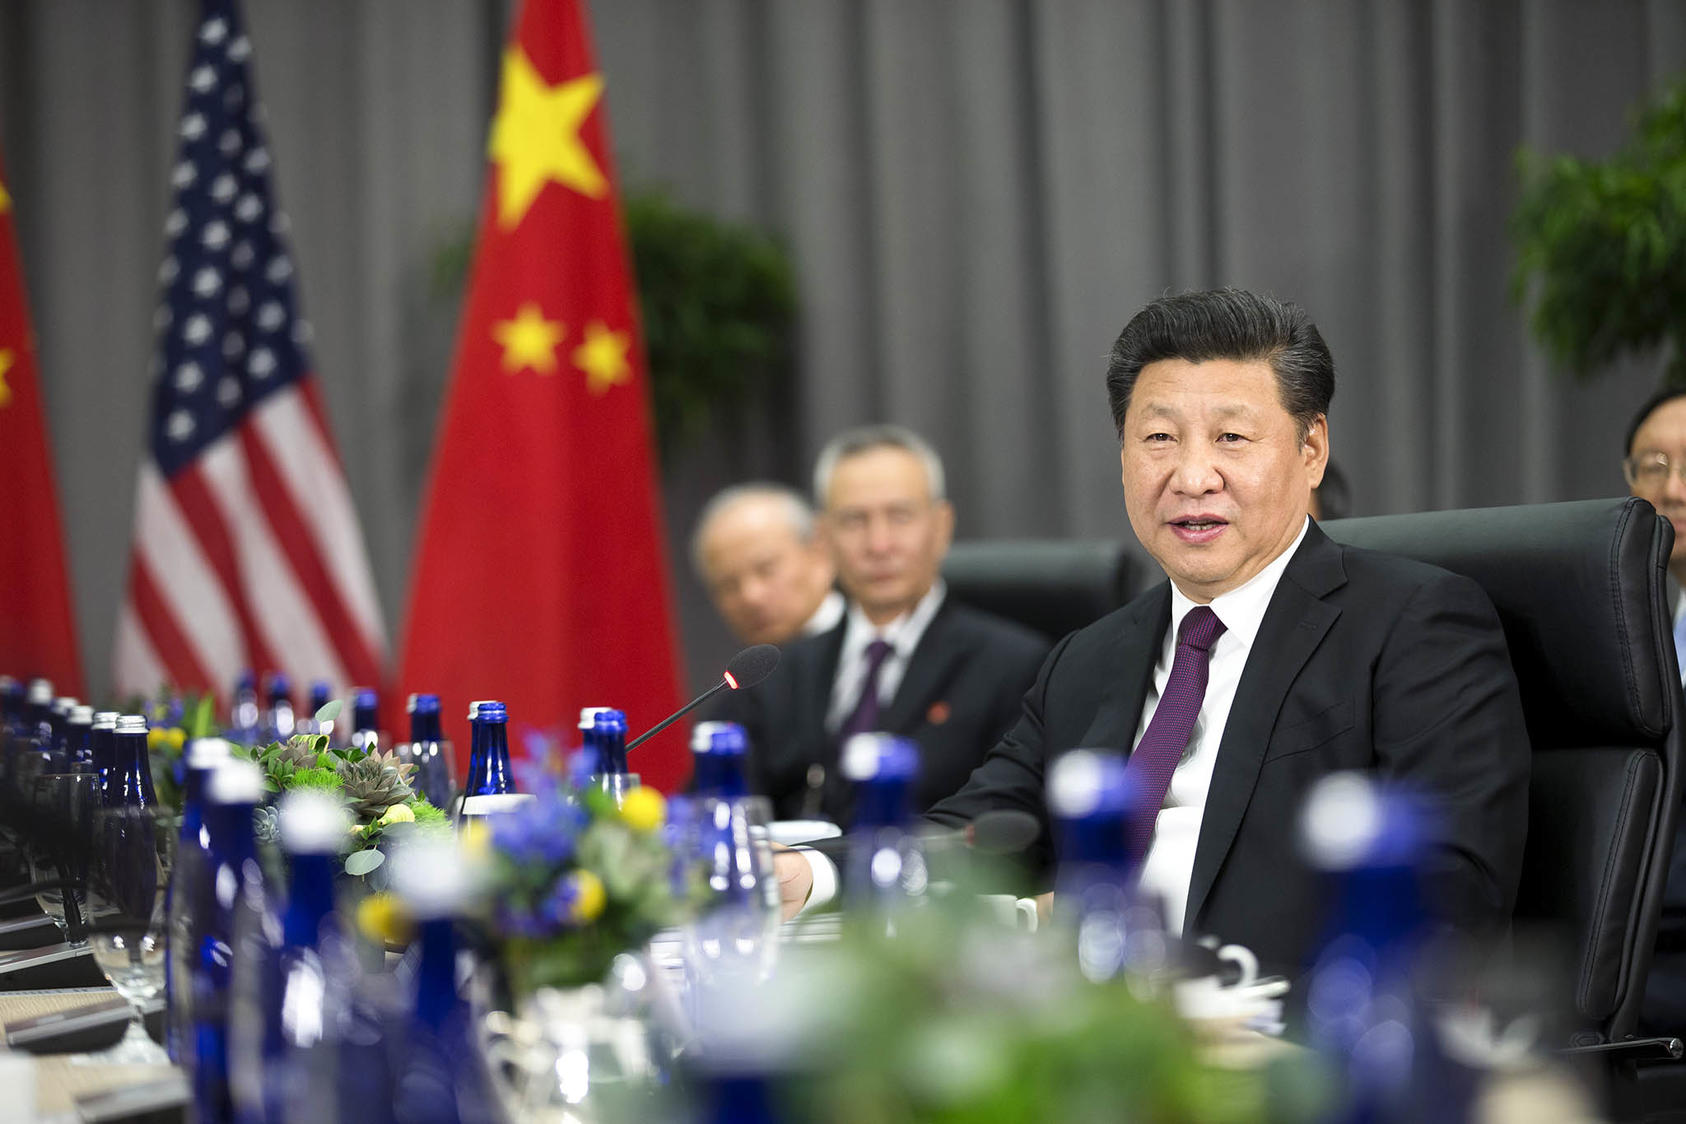 Chinese President Xi Jinping speaks while meeting with President Barack Obama during the Nuclear Security Summit in Washington, March 31, 2016. (Doug Mills/The New York Times)